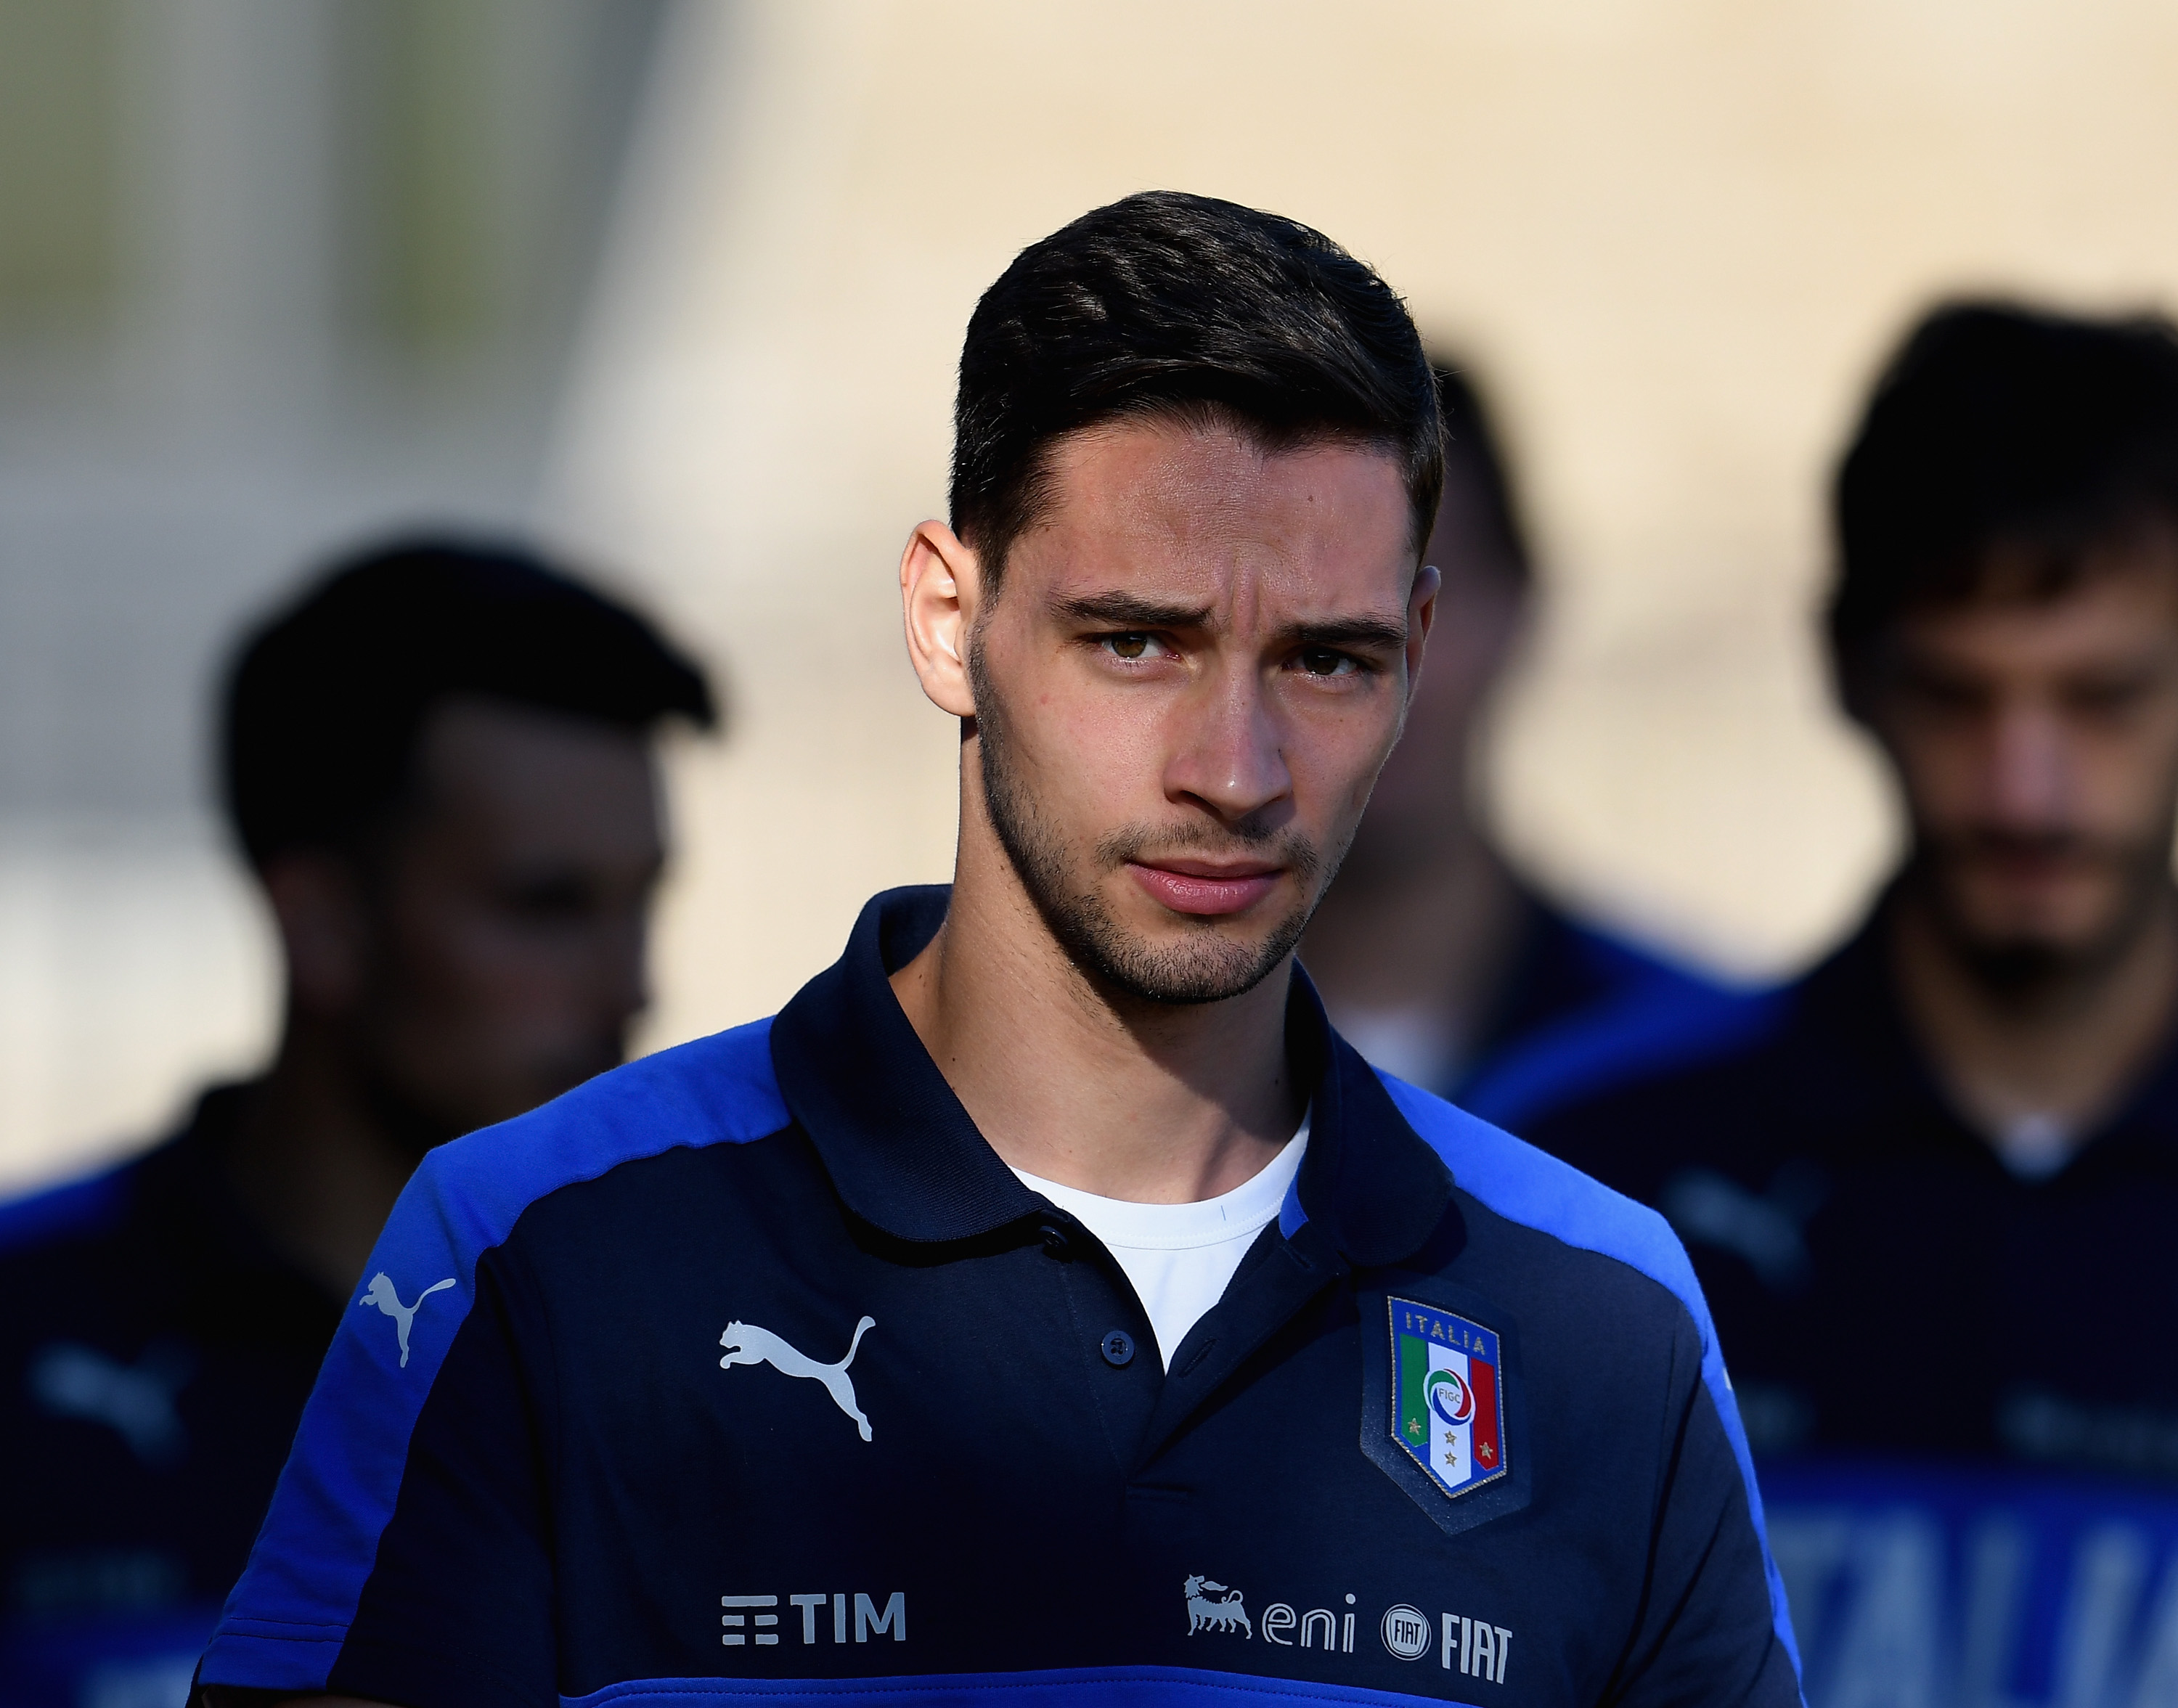 FLORENCE, ITALY - OCTOBER 04:  Mattia De Sciglio of Italy looks on prior to the training session at the club's training ground at Coverciano on October 4, 2016 in Florence, Italy.  (Photo by Claudio Villa/Getty Images)